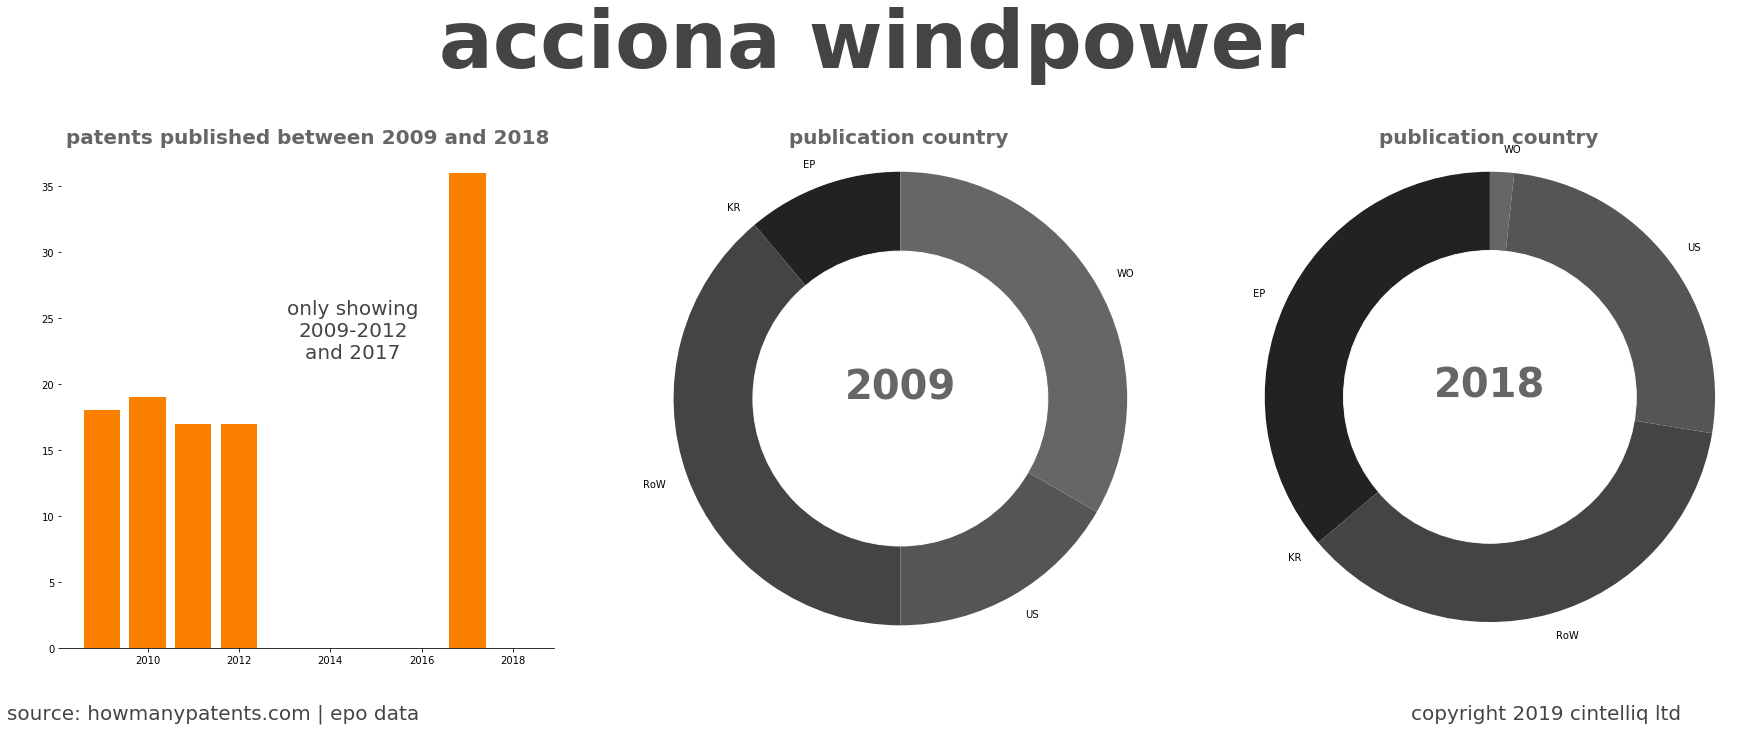 summary of patents for Acciona Windpower